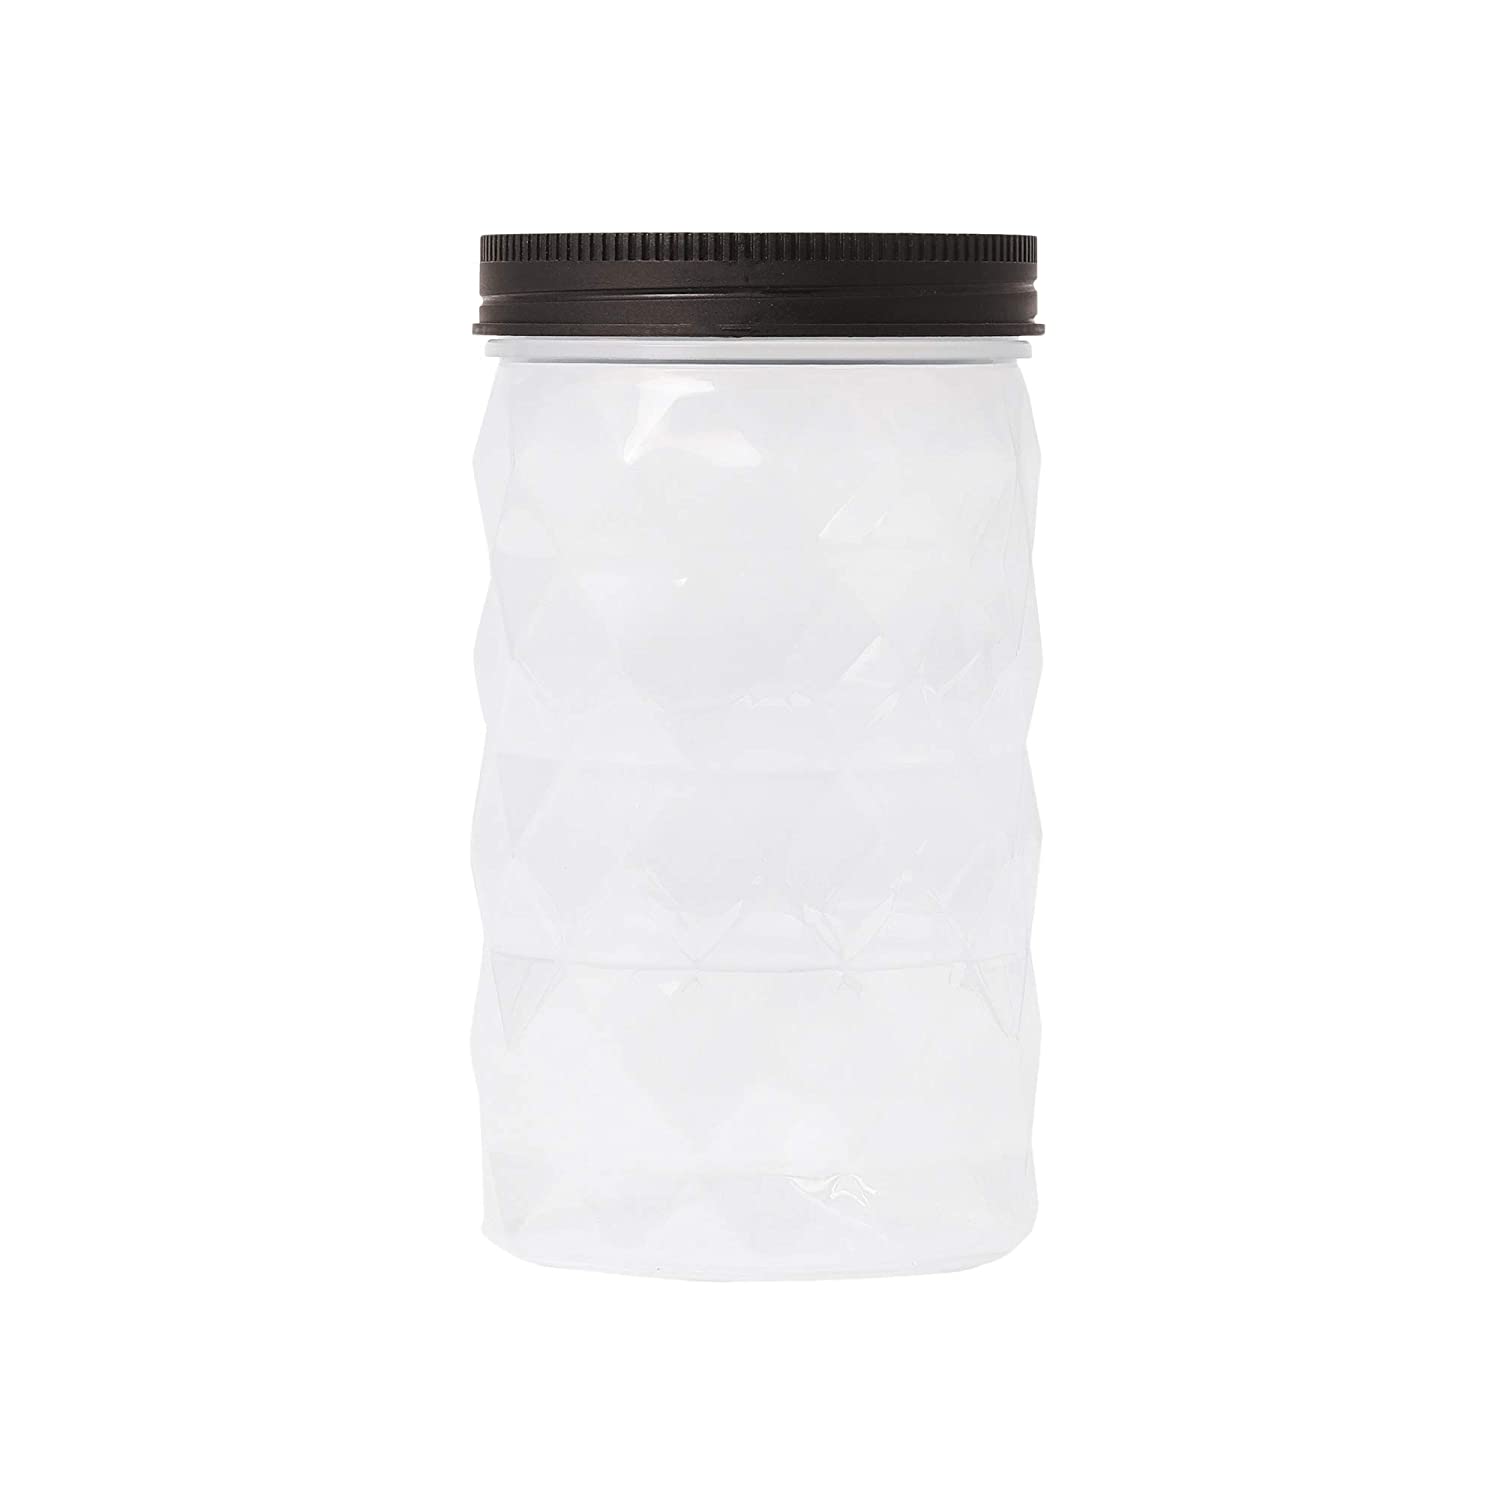 Cutting EDGE Twister Airtight Plastic Mini Jar Without Basket, Clear, Diamond Checkers Container - for Rice, Dal, Atta, Flour, Cereals, Pulses, Snacks, Stackable, BPA Free